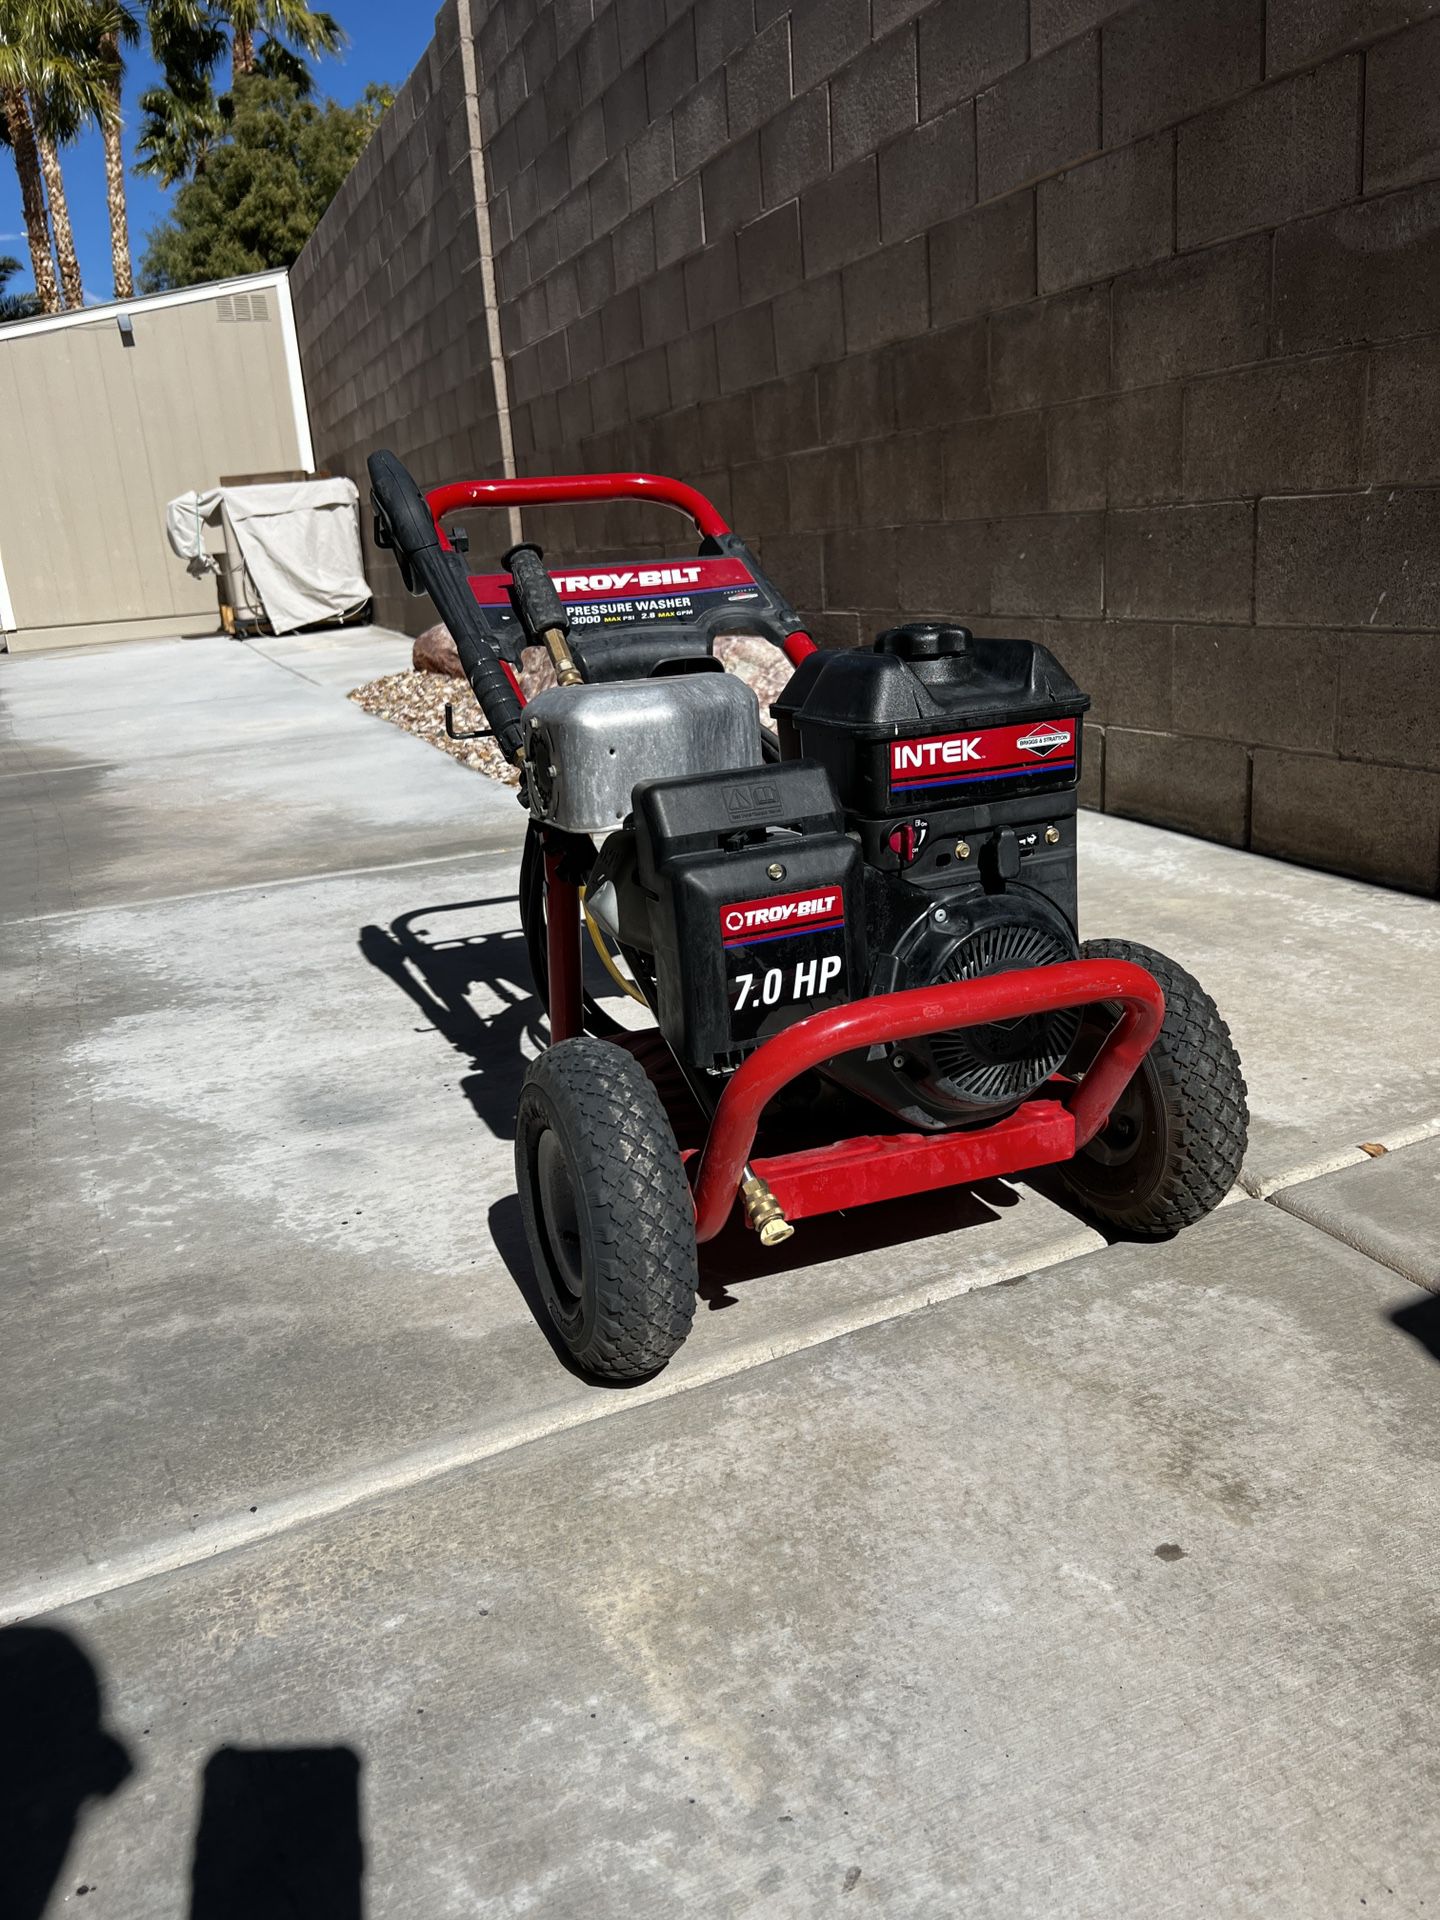 Troy Built Pressure Washer 7 HP